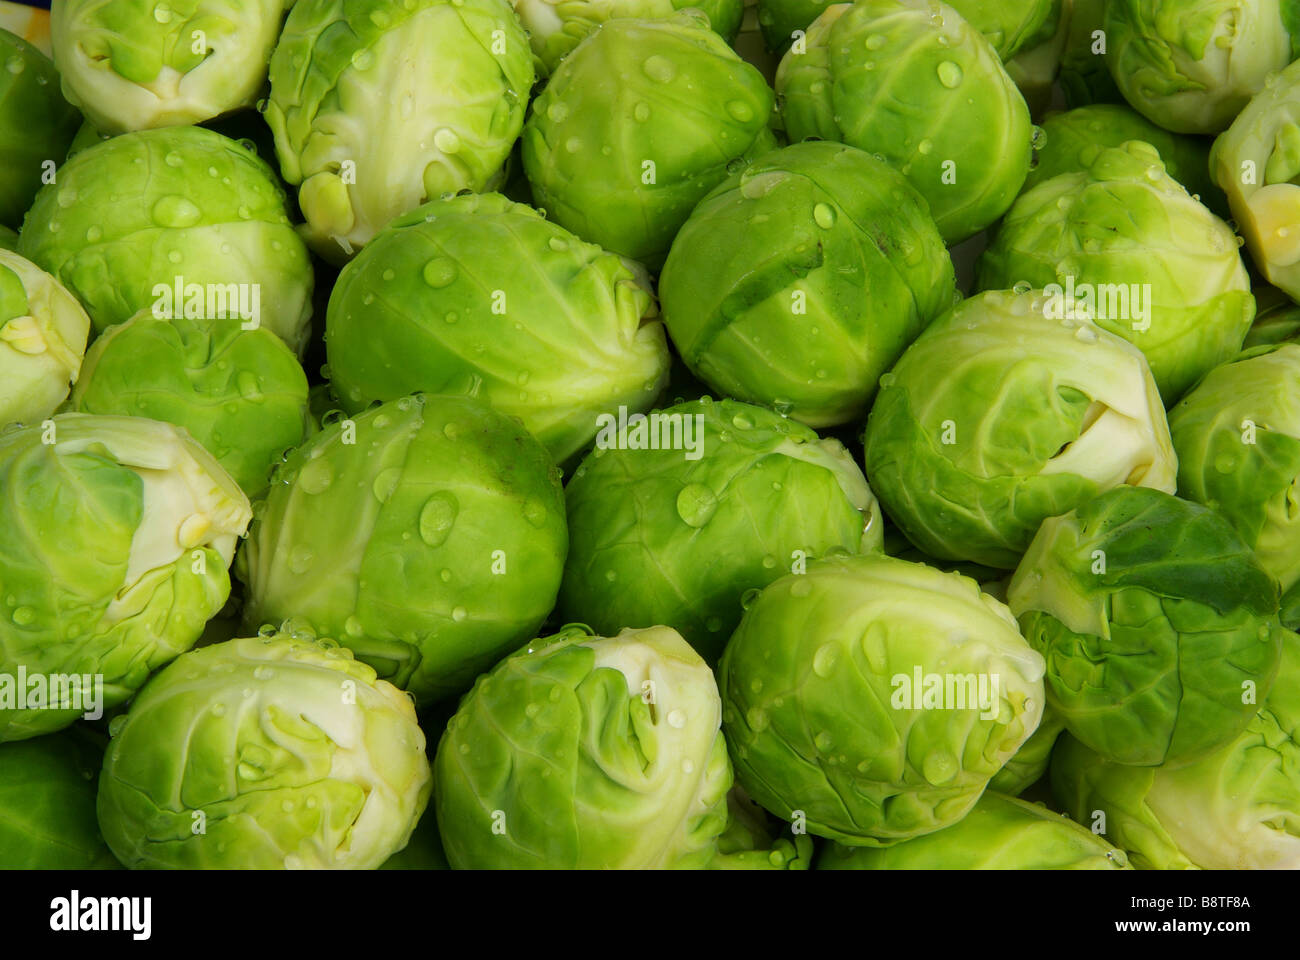 Rosenkohl Brussels sprout 03 Stock Photo